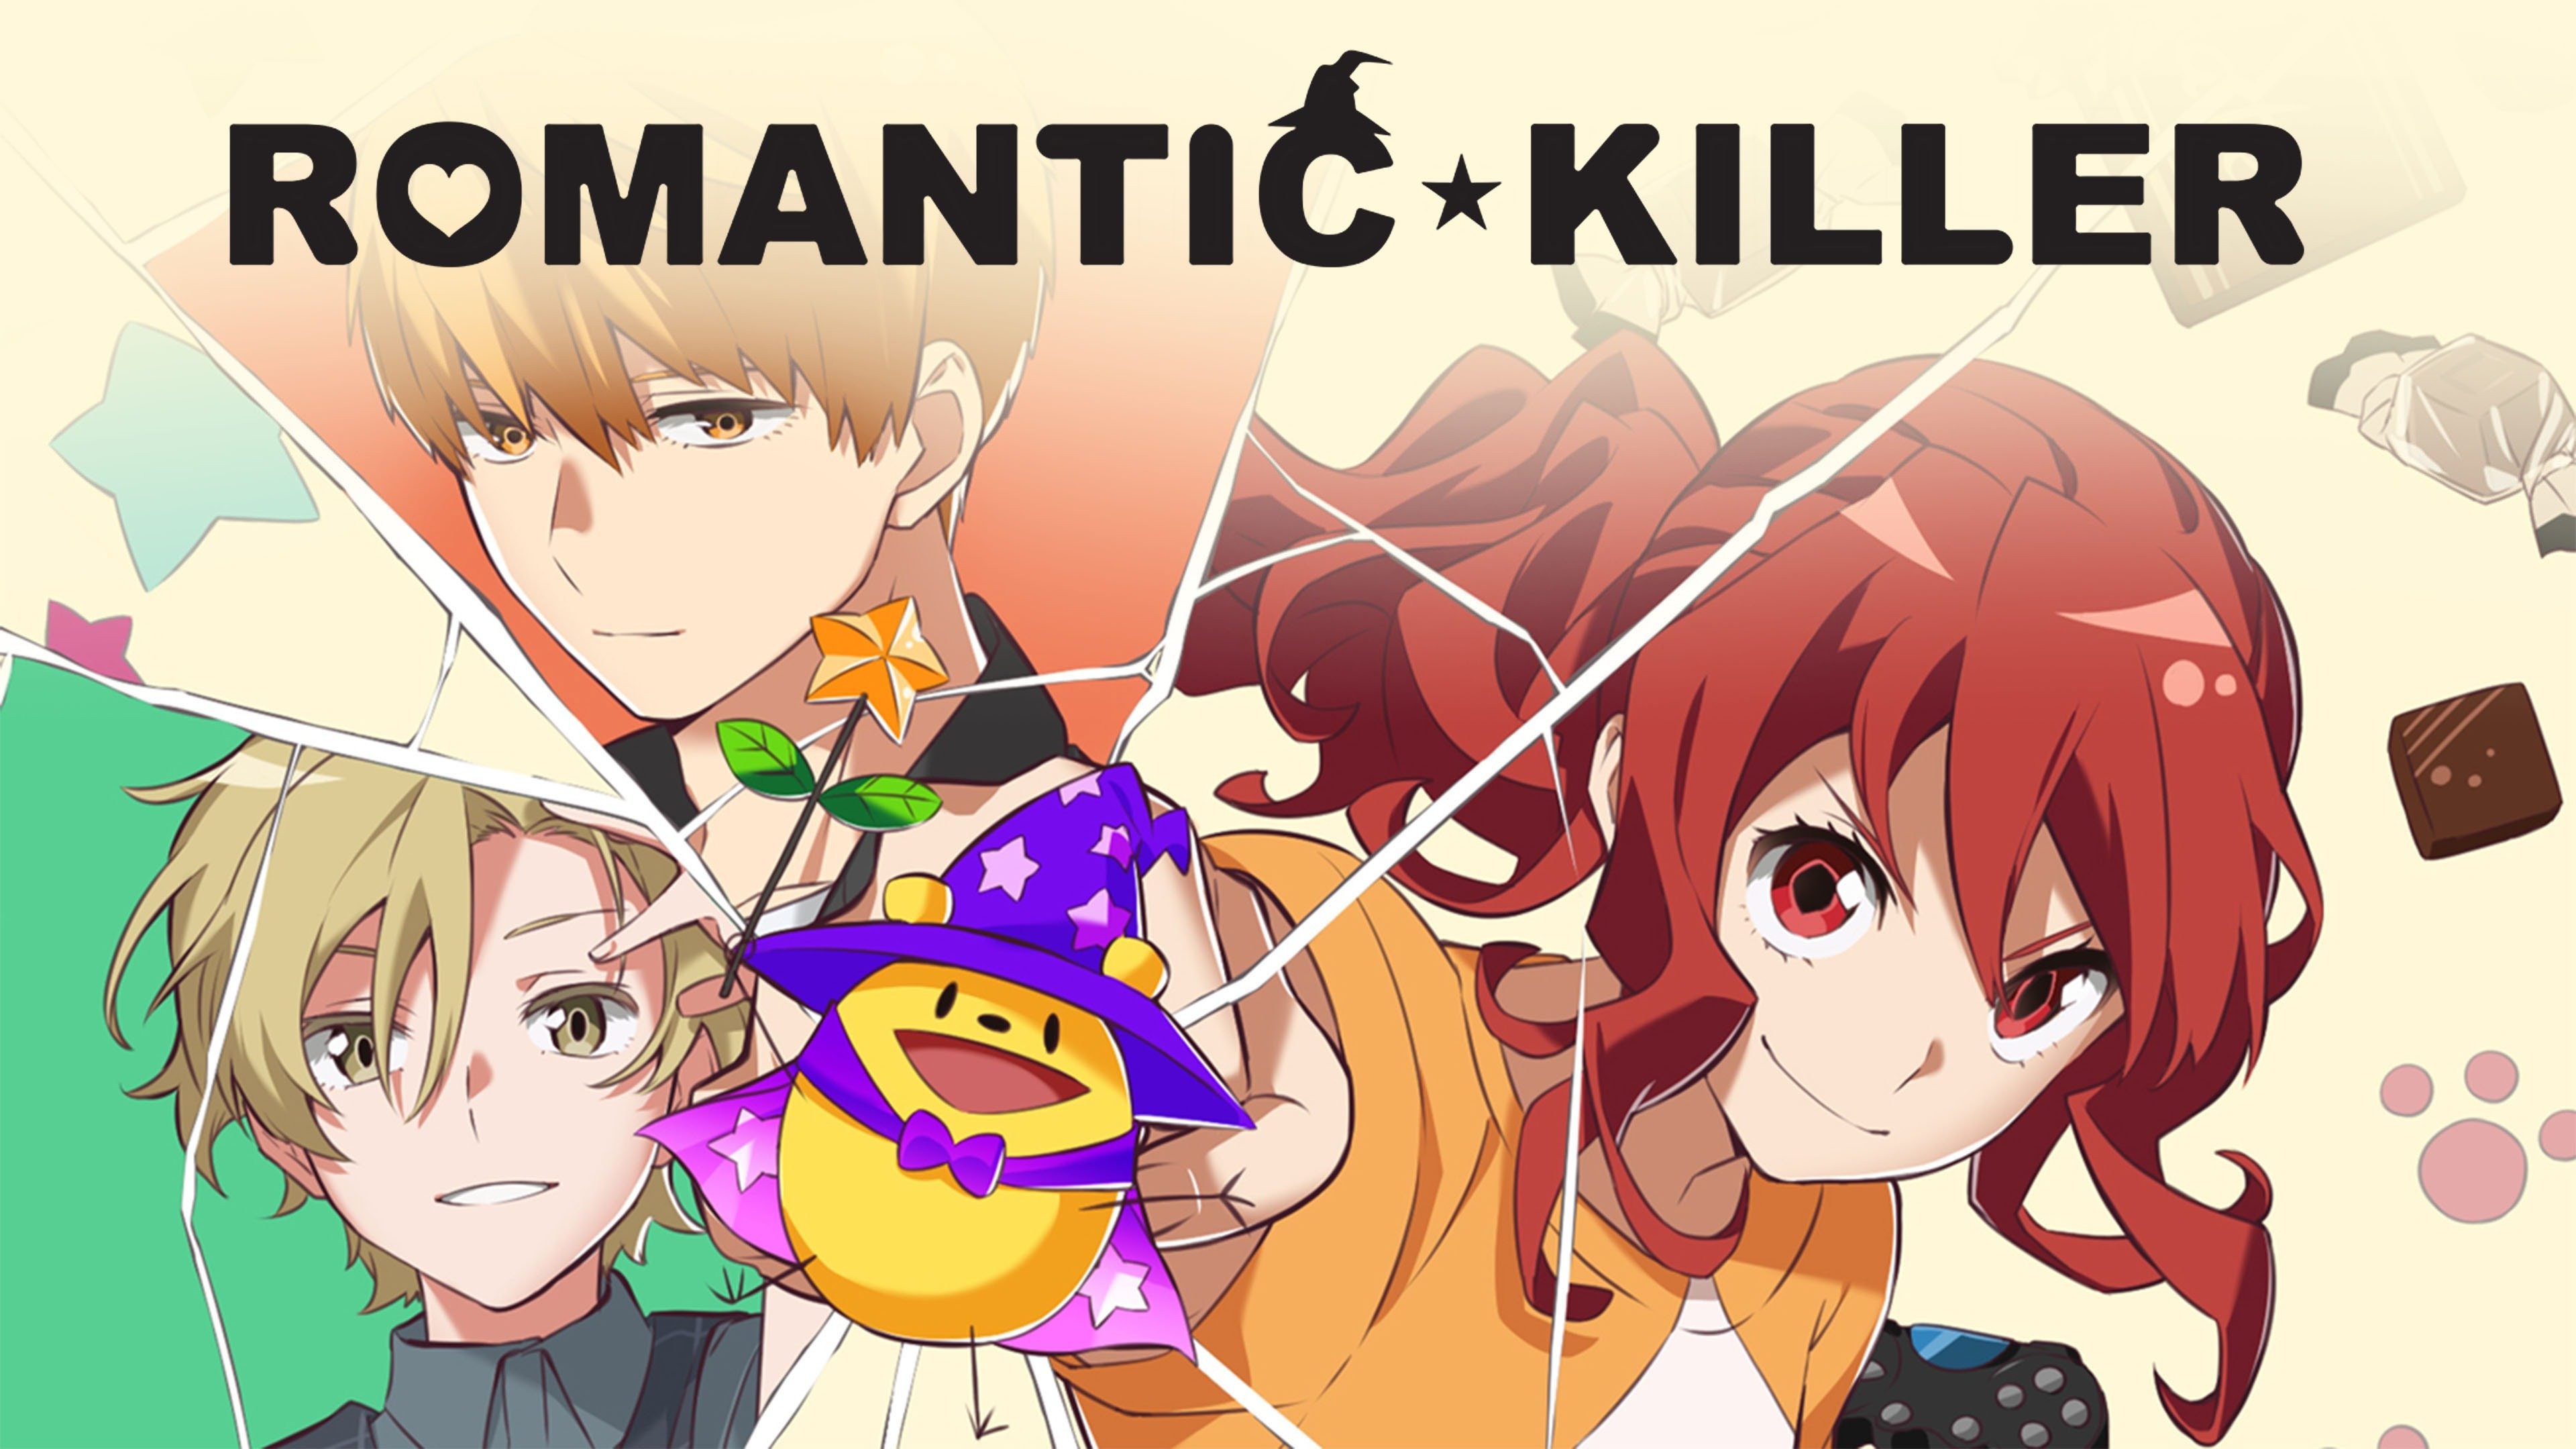 Atypical Anime To Watch If You Like Romantic Killer